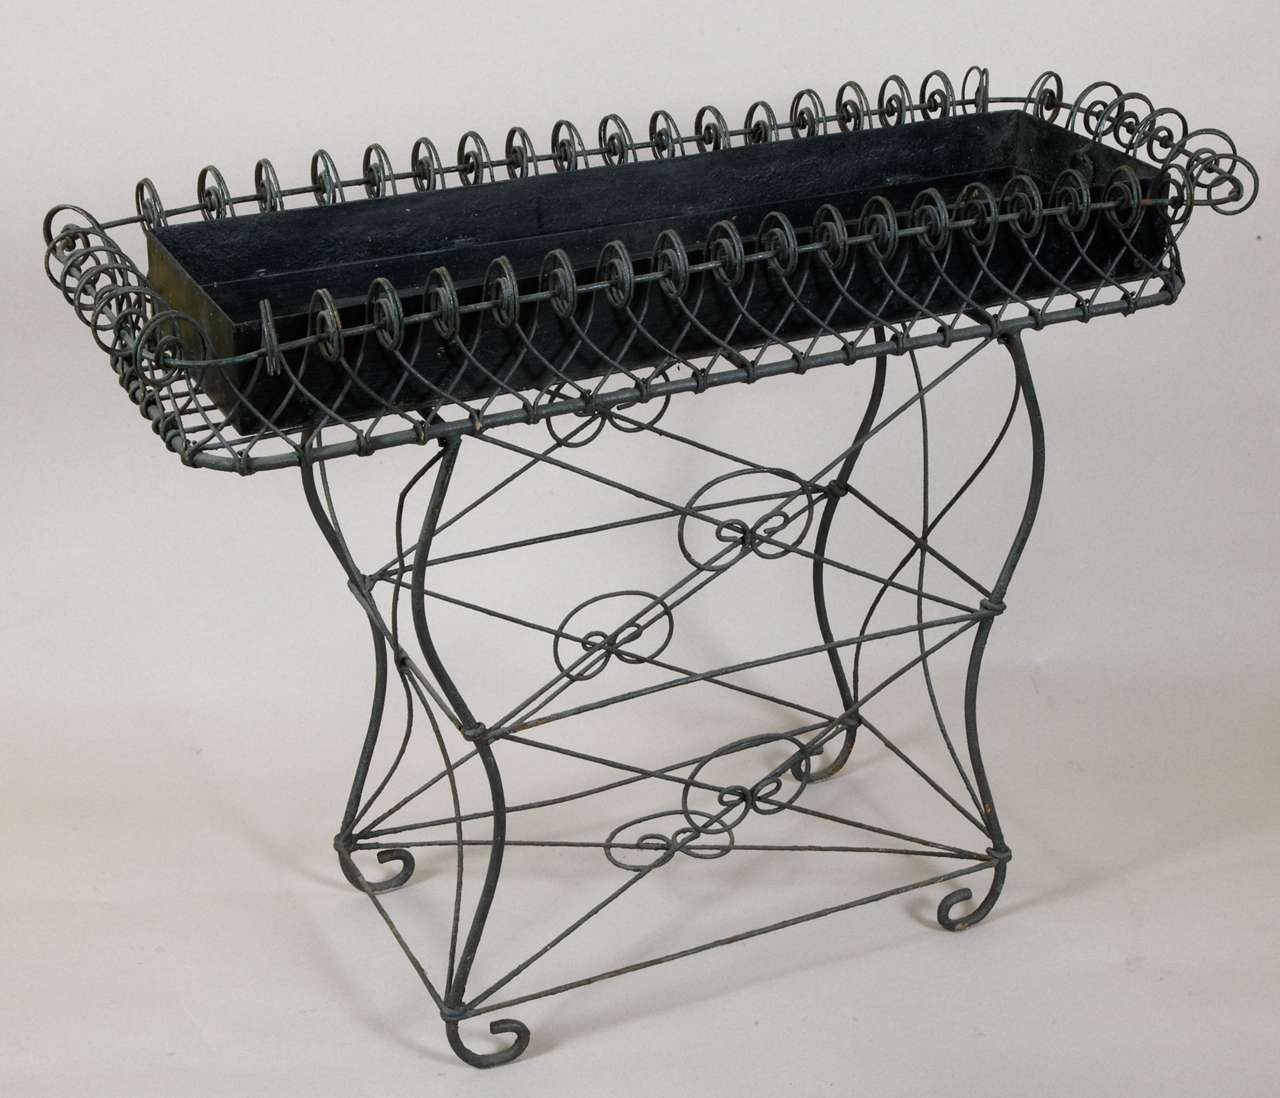 Two 1950s jardinières by Pierre Lottier, a French decorator, with metal tubes worked by hand. Iron container for water reserve with ring to pullout.